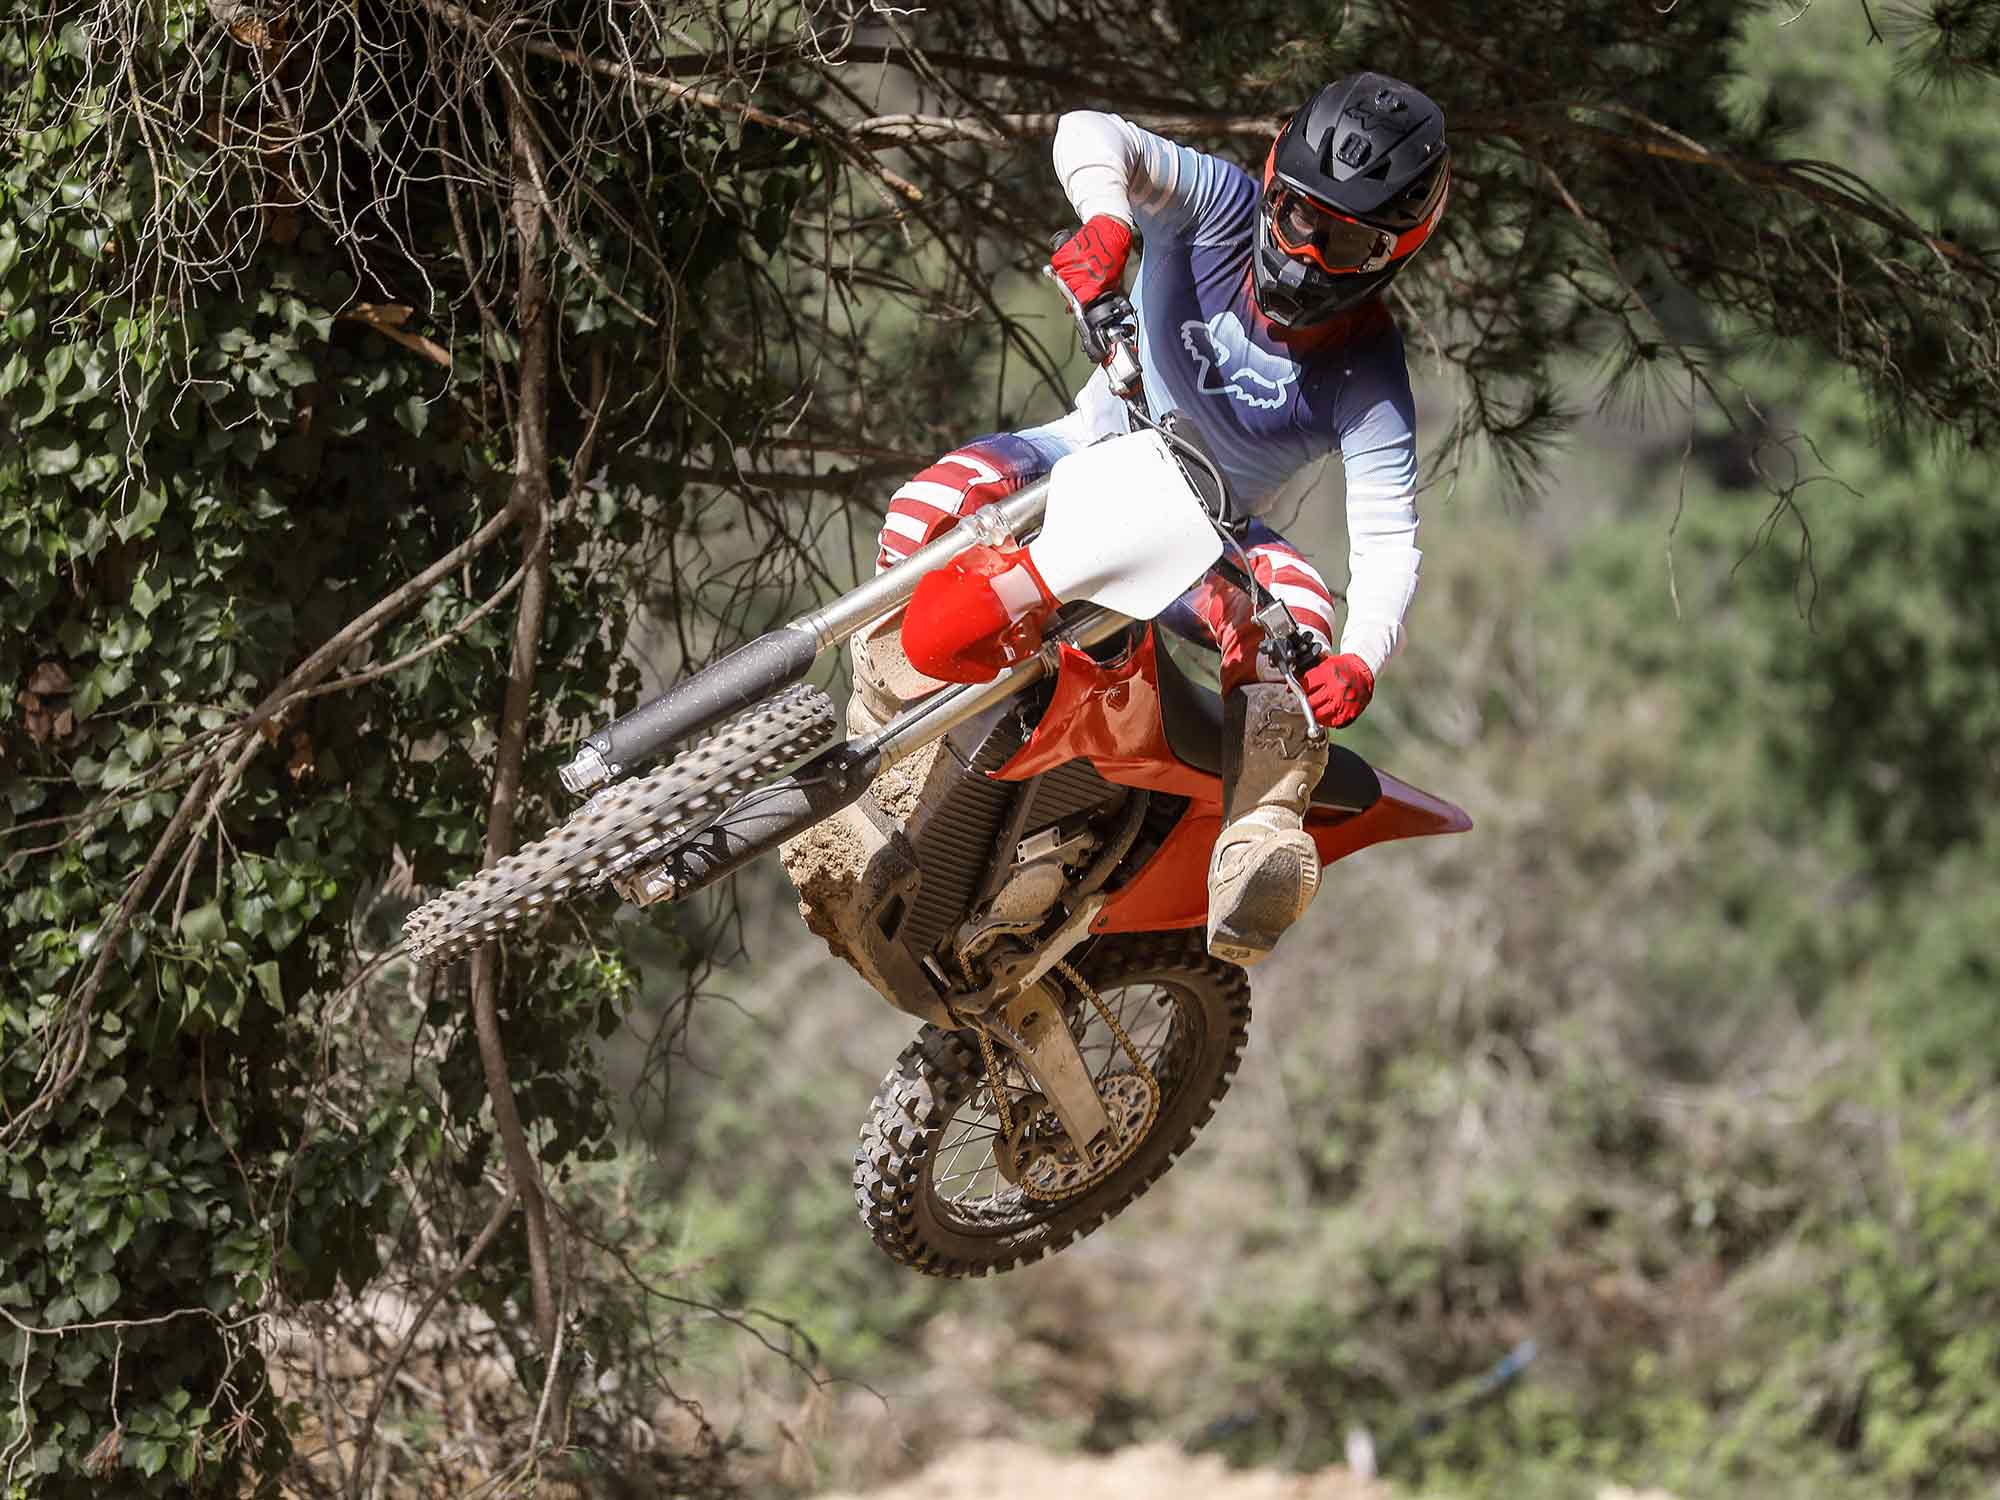 We Test Ride the All-Electric Stark Future VARG MX - Motocross Feature -  Vital MX